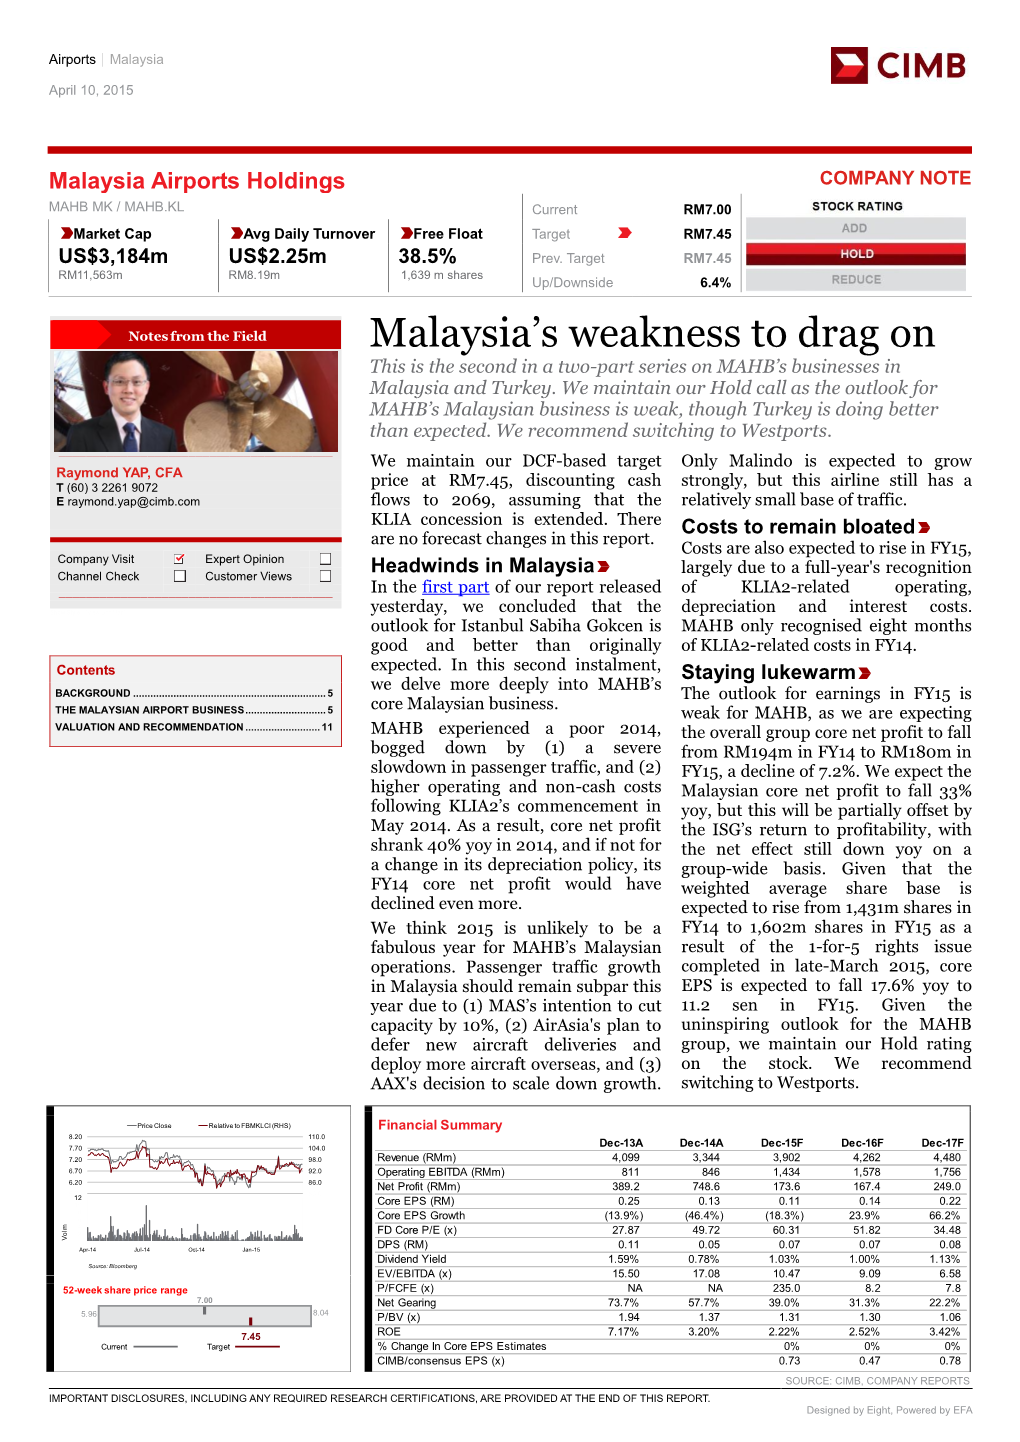 Malaysia's Weakness to Drag On